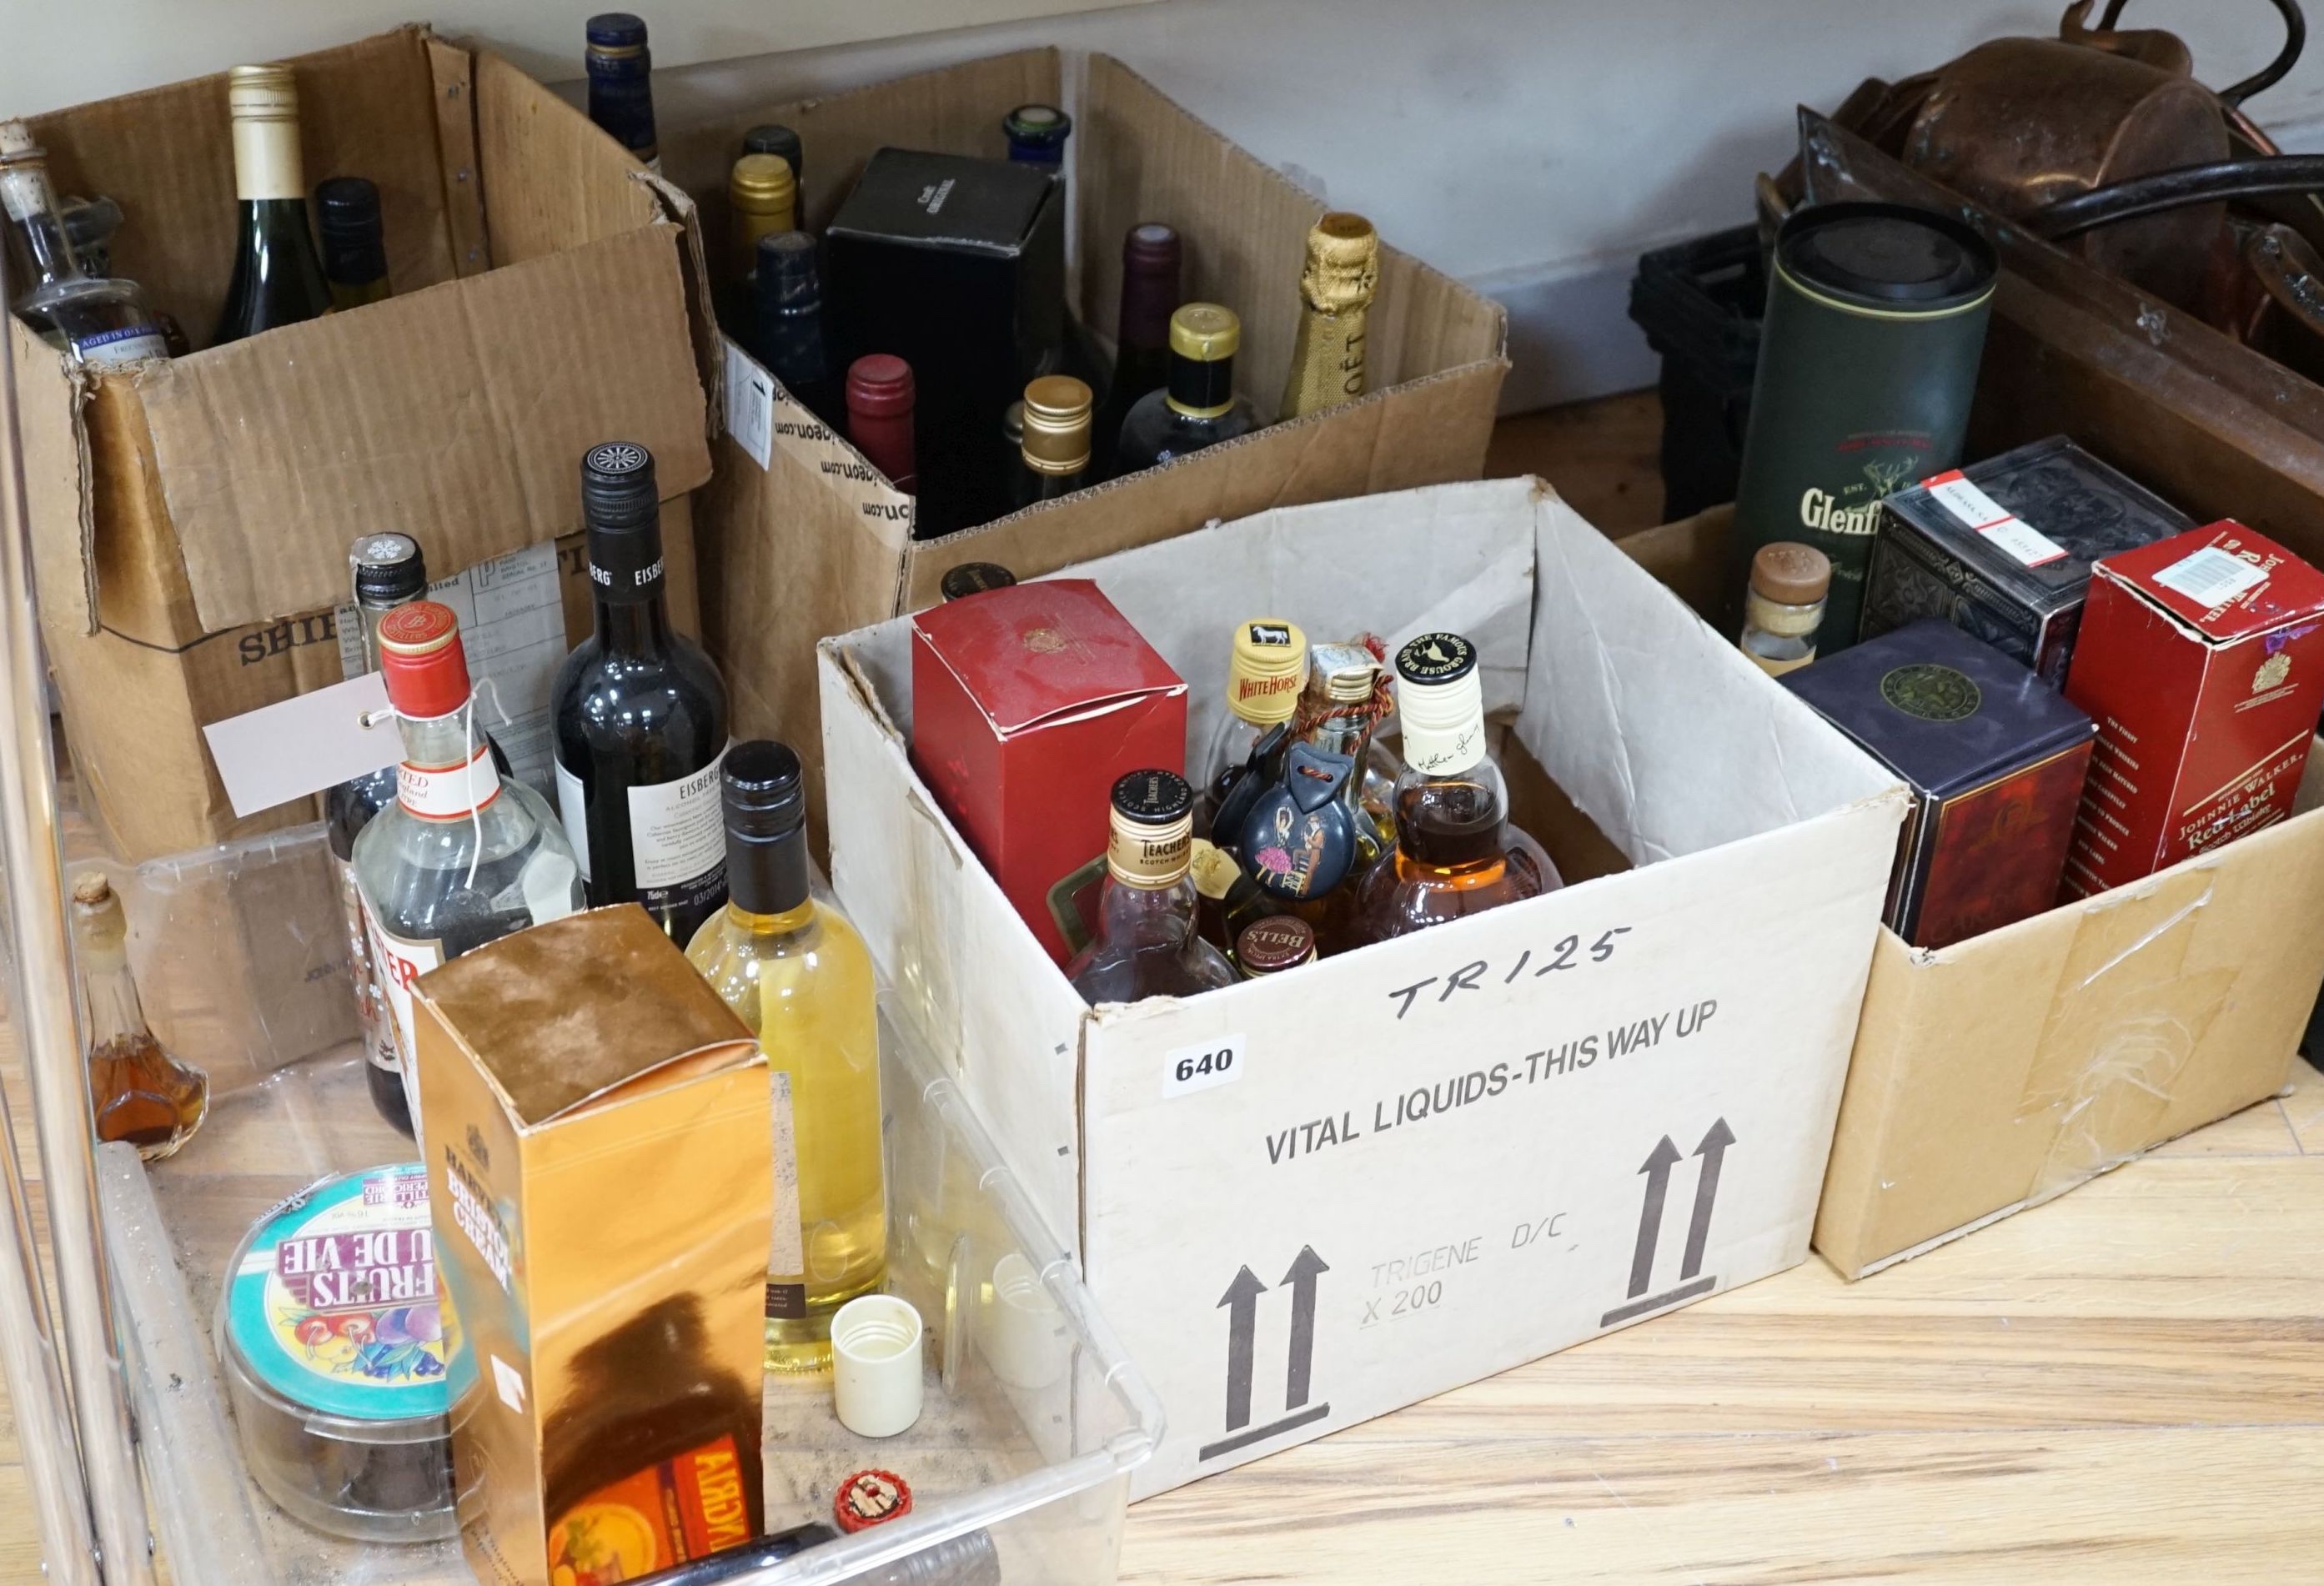 41 Assorted bottles of spirits, wine and liqueurs - 5 boxes